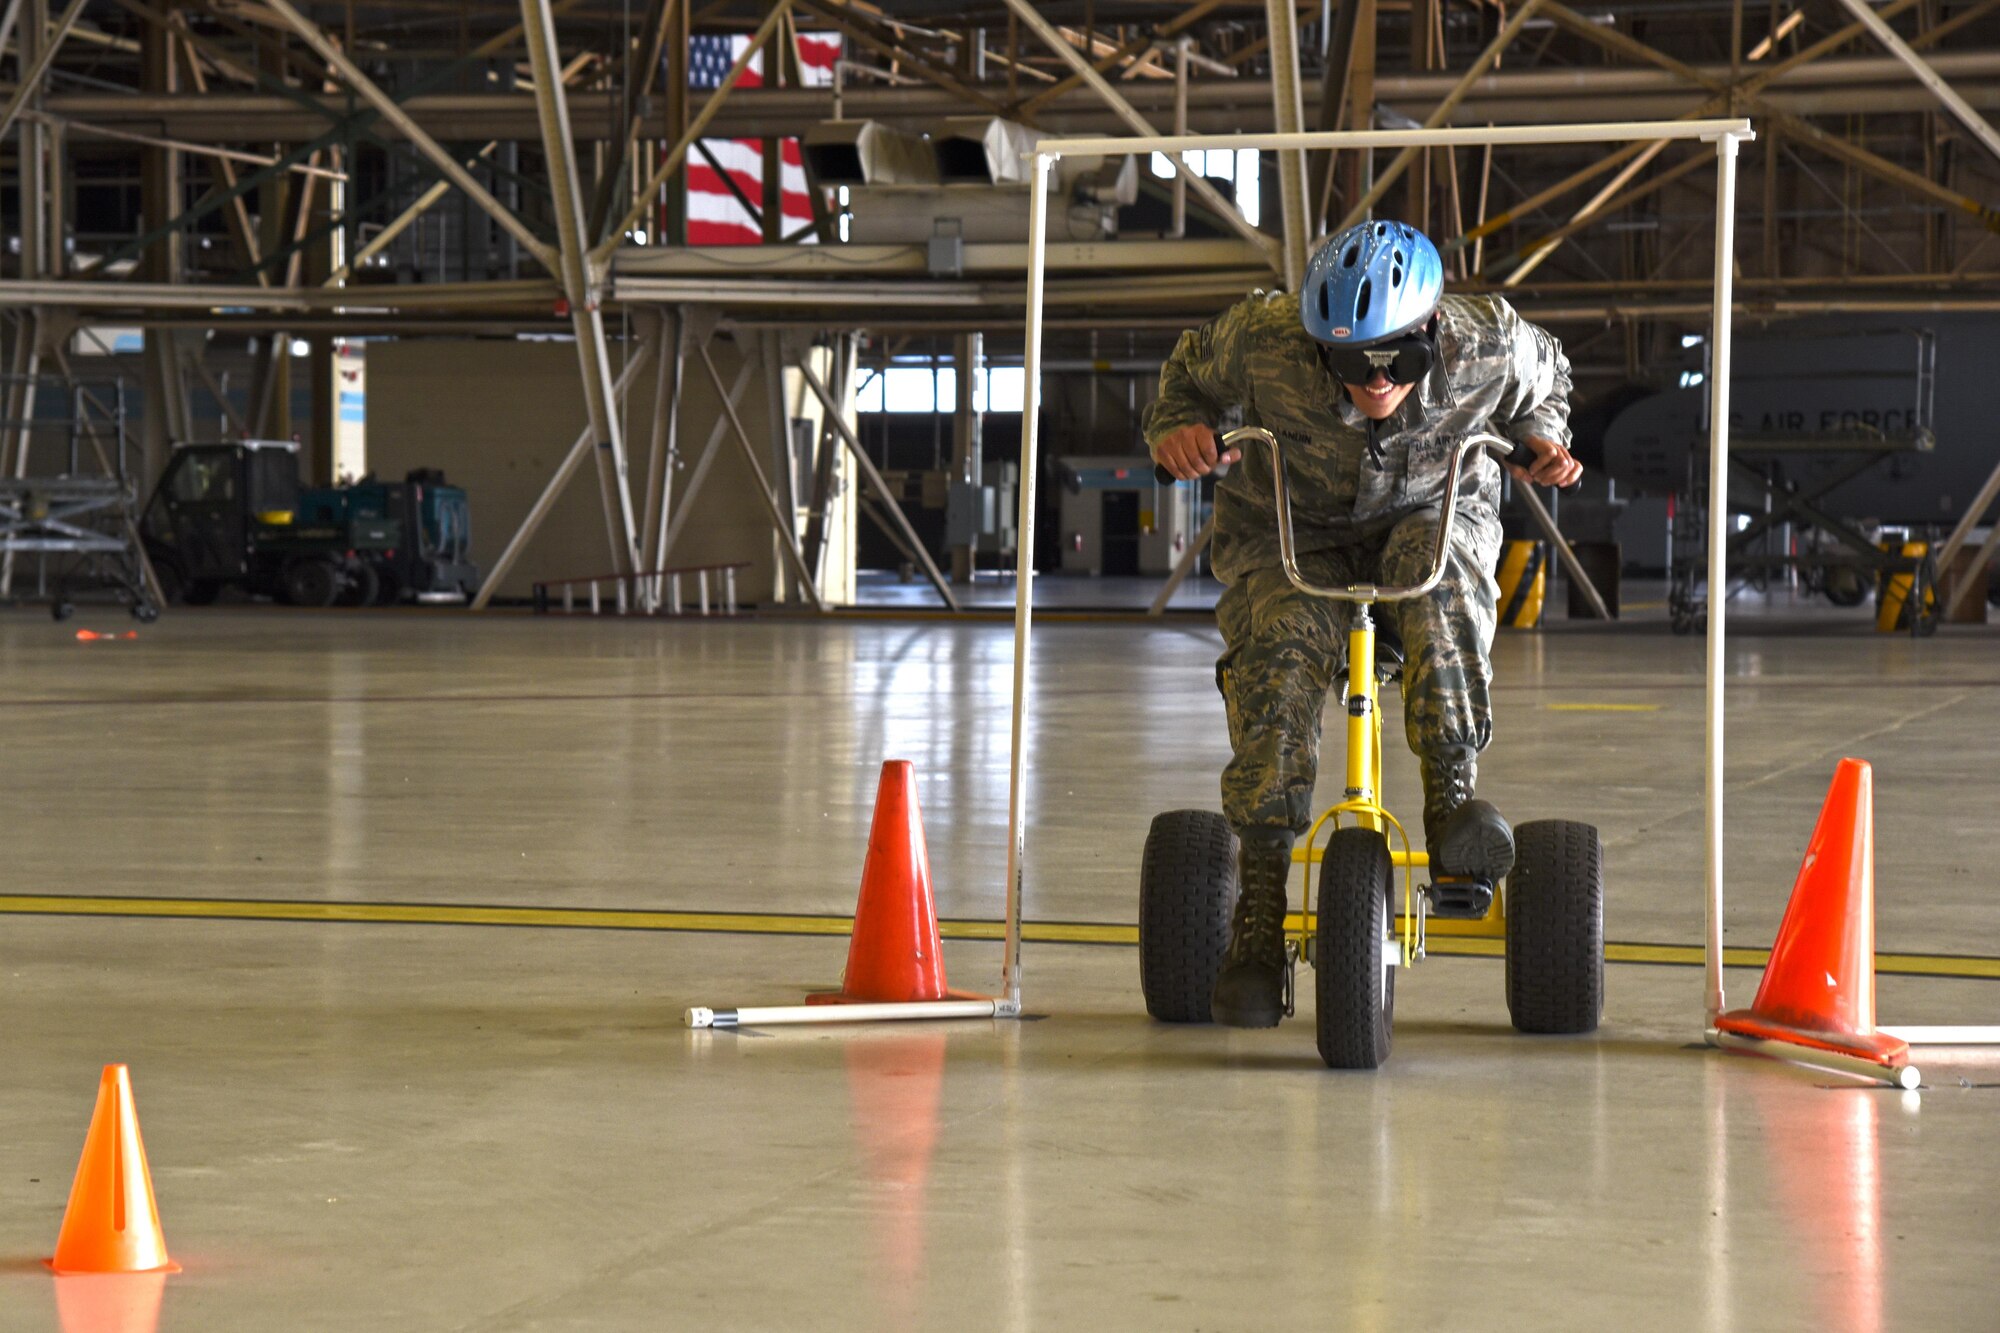 Staff Sgt. Anthony Landin, 92nd Maintenance Squadron aircraft hydraulics system craftsman, participates in the drunken tricycle obstacle course during the 92nd and 141st Maintenance Group Fall Olympics Nov. 15, 2016, at Fairchild Air Force Base. Seven teams participated in four events held throughout the day including circuit building, safety wire challenge, aircraft ground equipment race and a drunken tricycle obstacle course. (U.S. Air Force photo/Airman 1st Class Ryan Lackey)